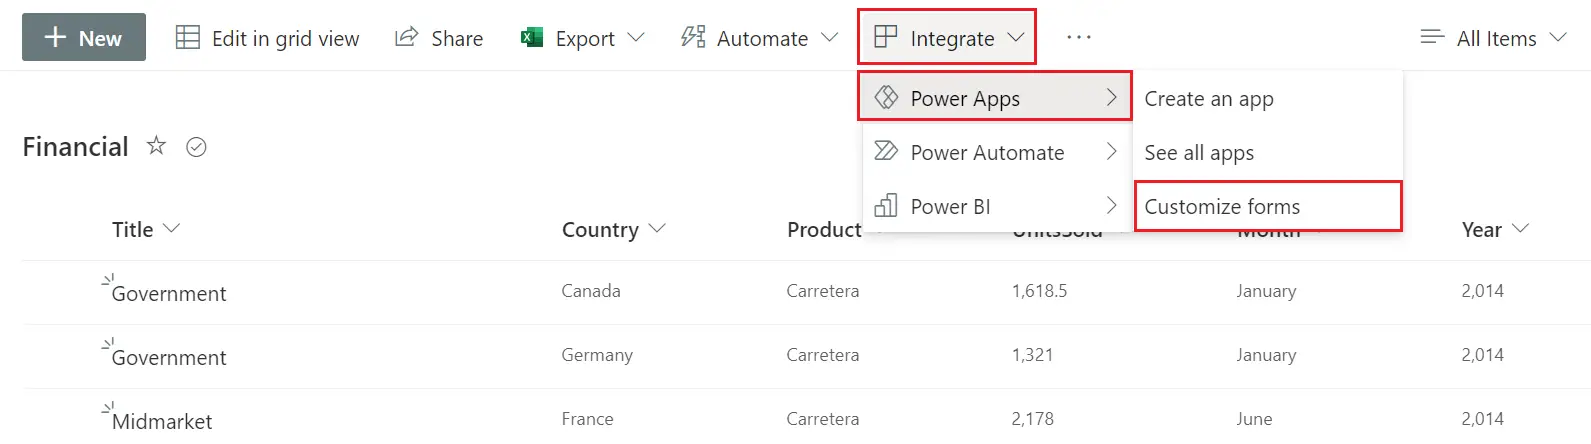 SP powerapps customize forms